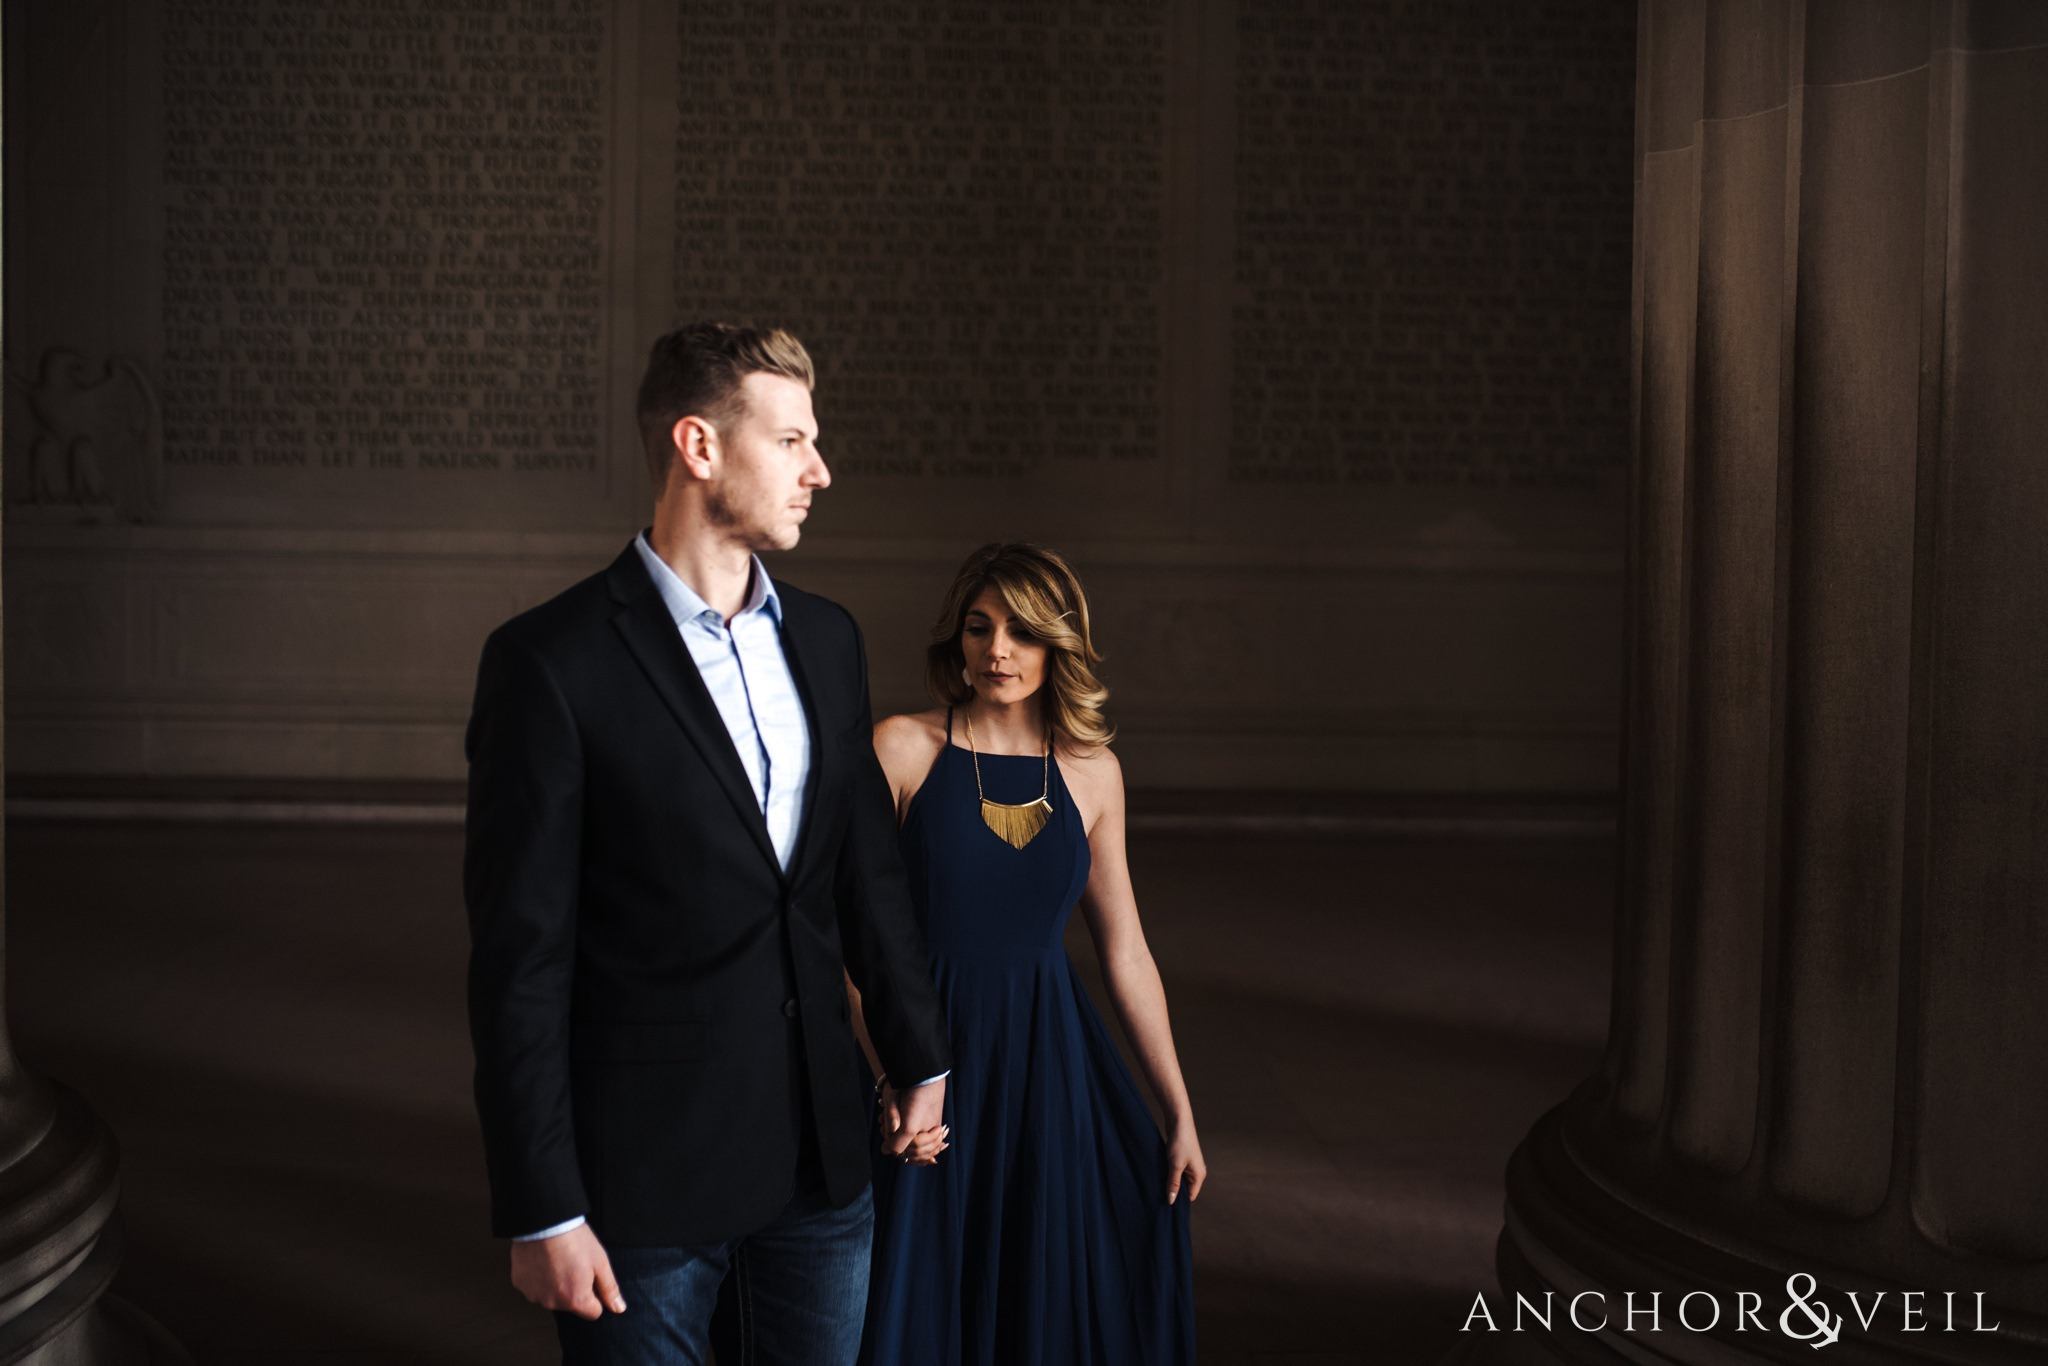 inside the memorial during their Scenic Washington DC Engagement Session